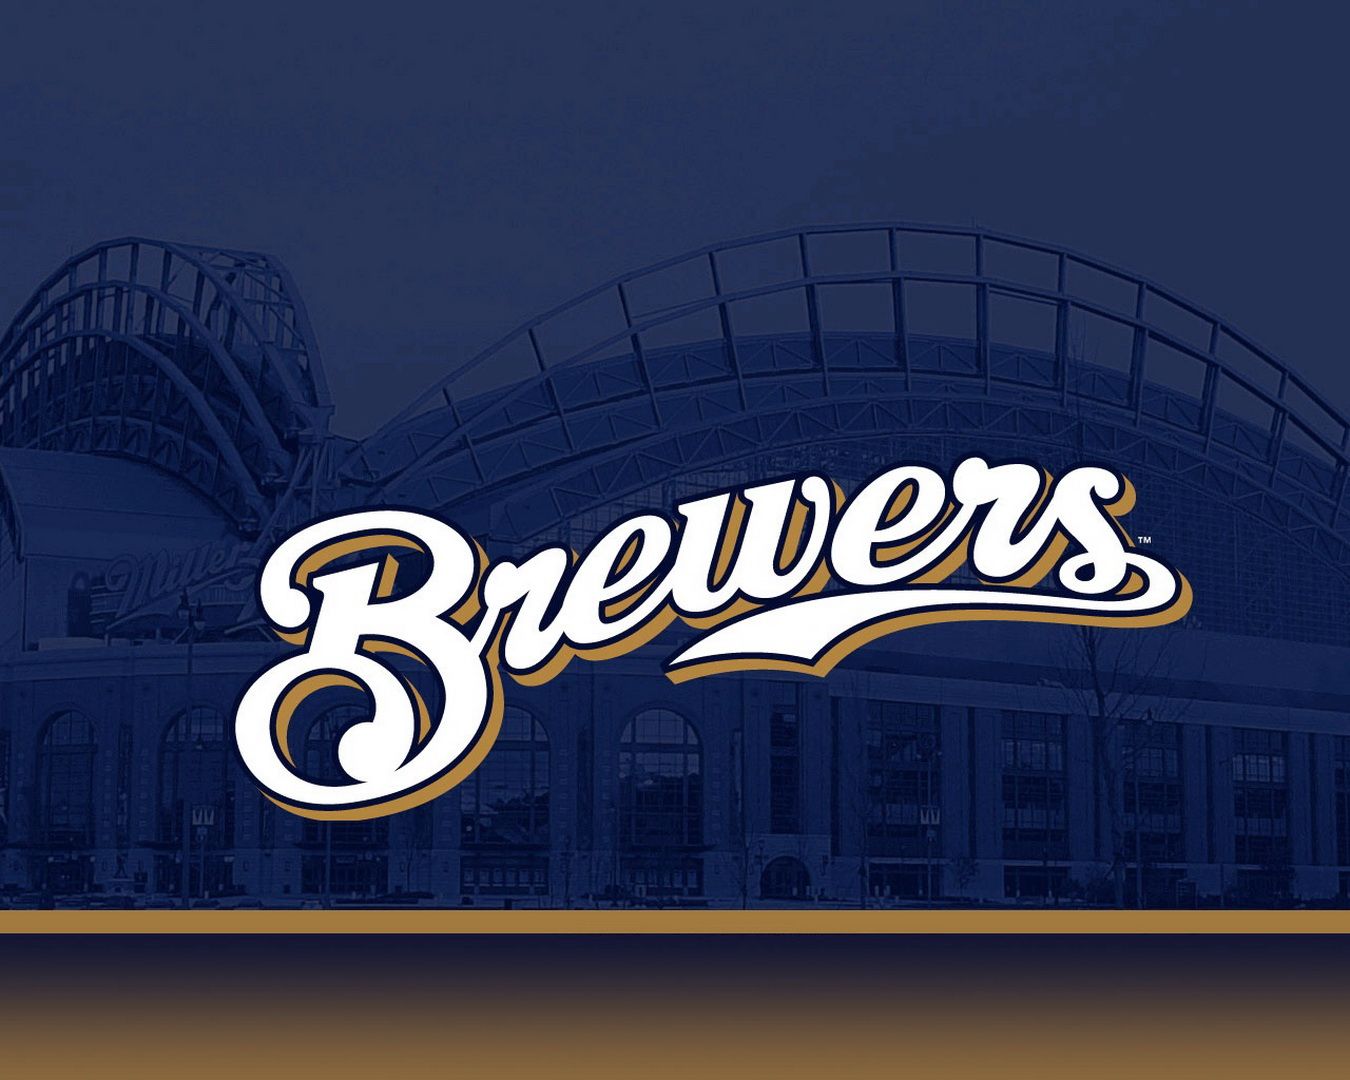 Brewers Background. Brewers Wallpaper